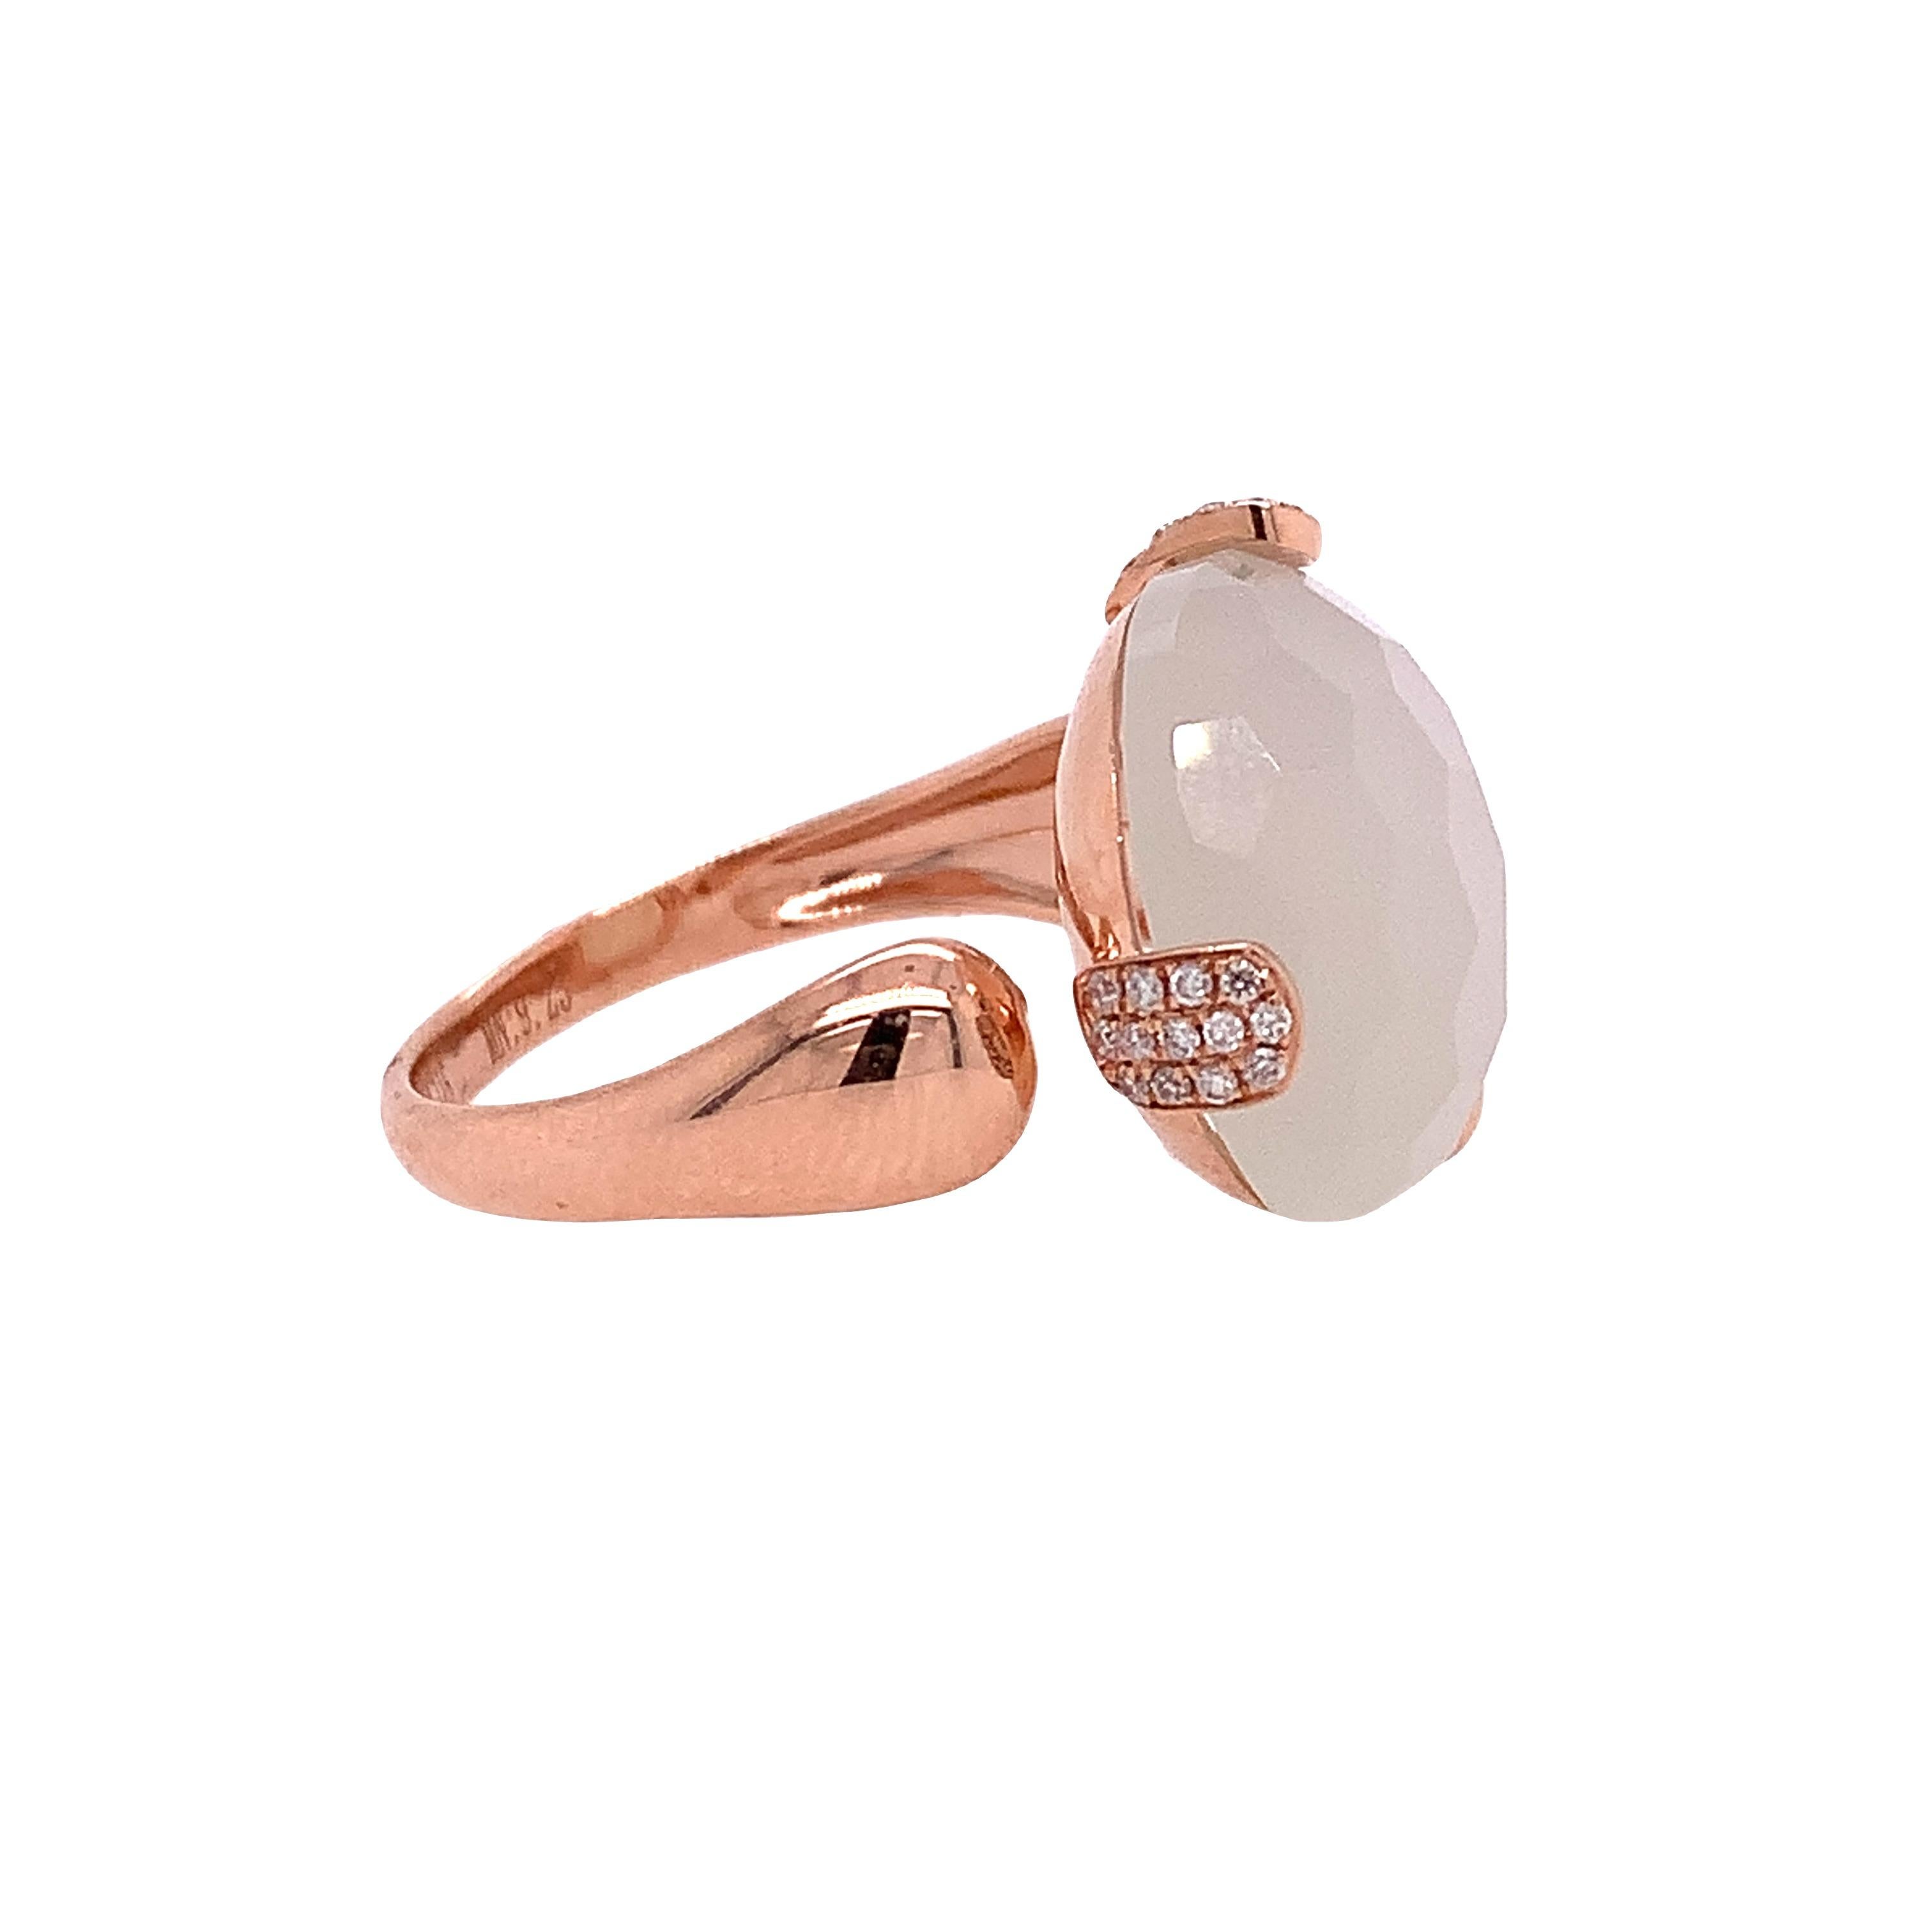 Palm Beach Collection

Check out our Moon Stone, known as moon magic stones that support your inner balance and protect on your journey which is decorated by diamond features as fashion ring set in 18K rose gold. 

Moon Stone: 9.25ct total